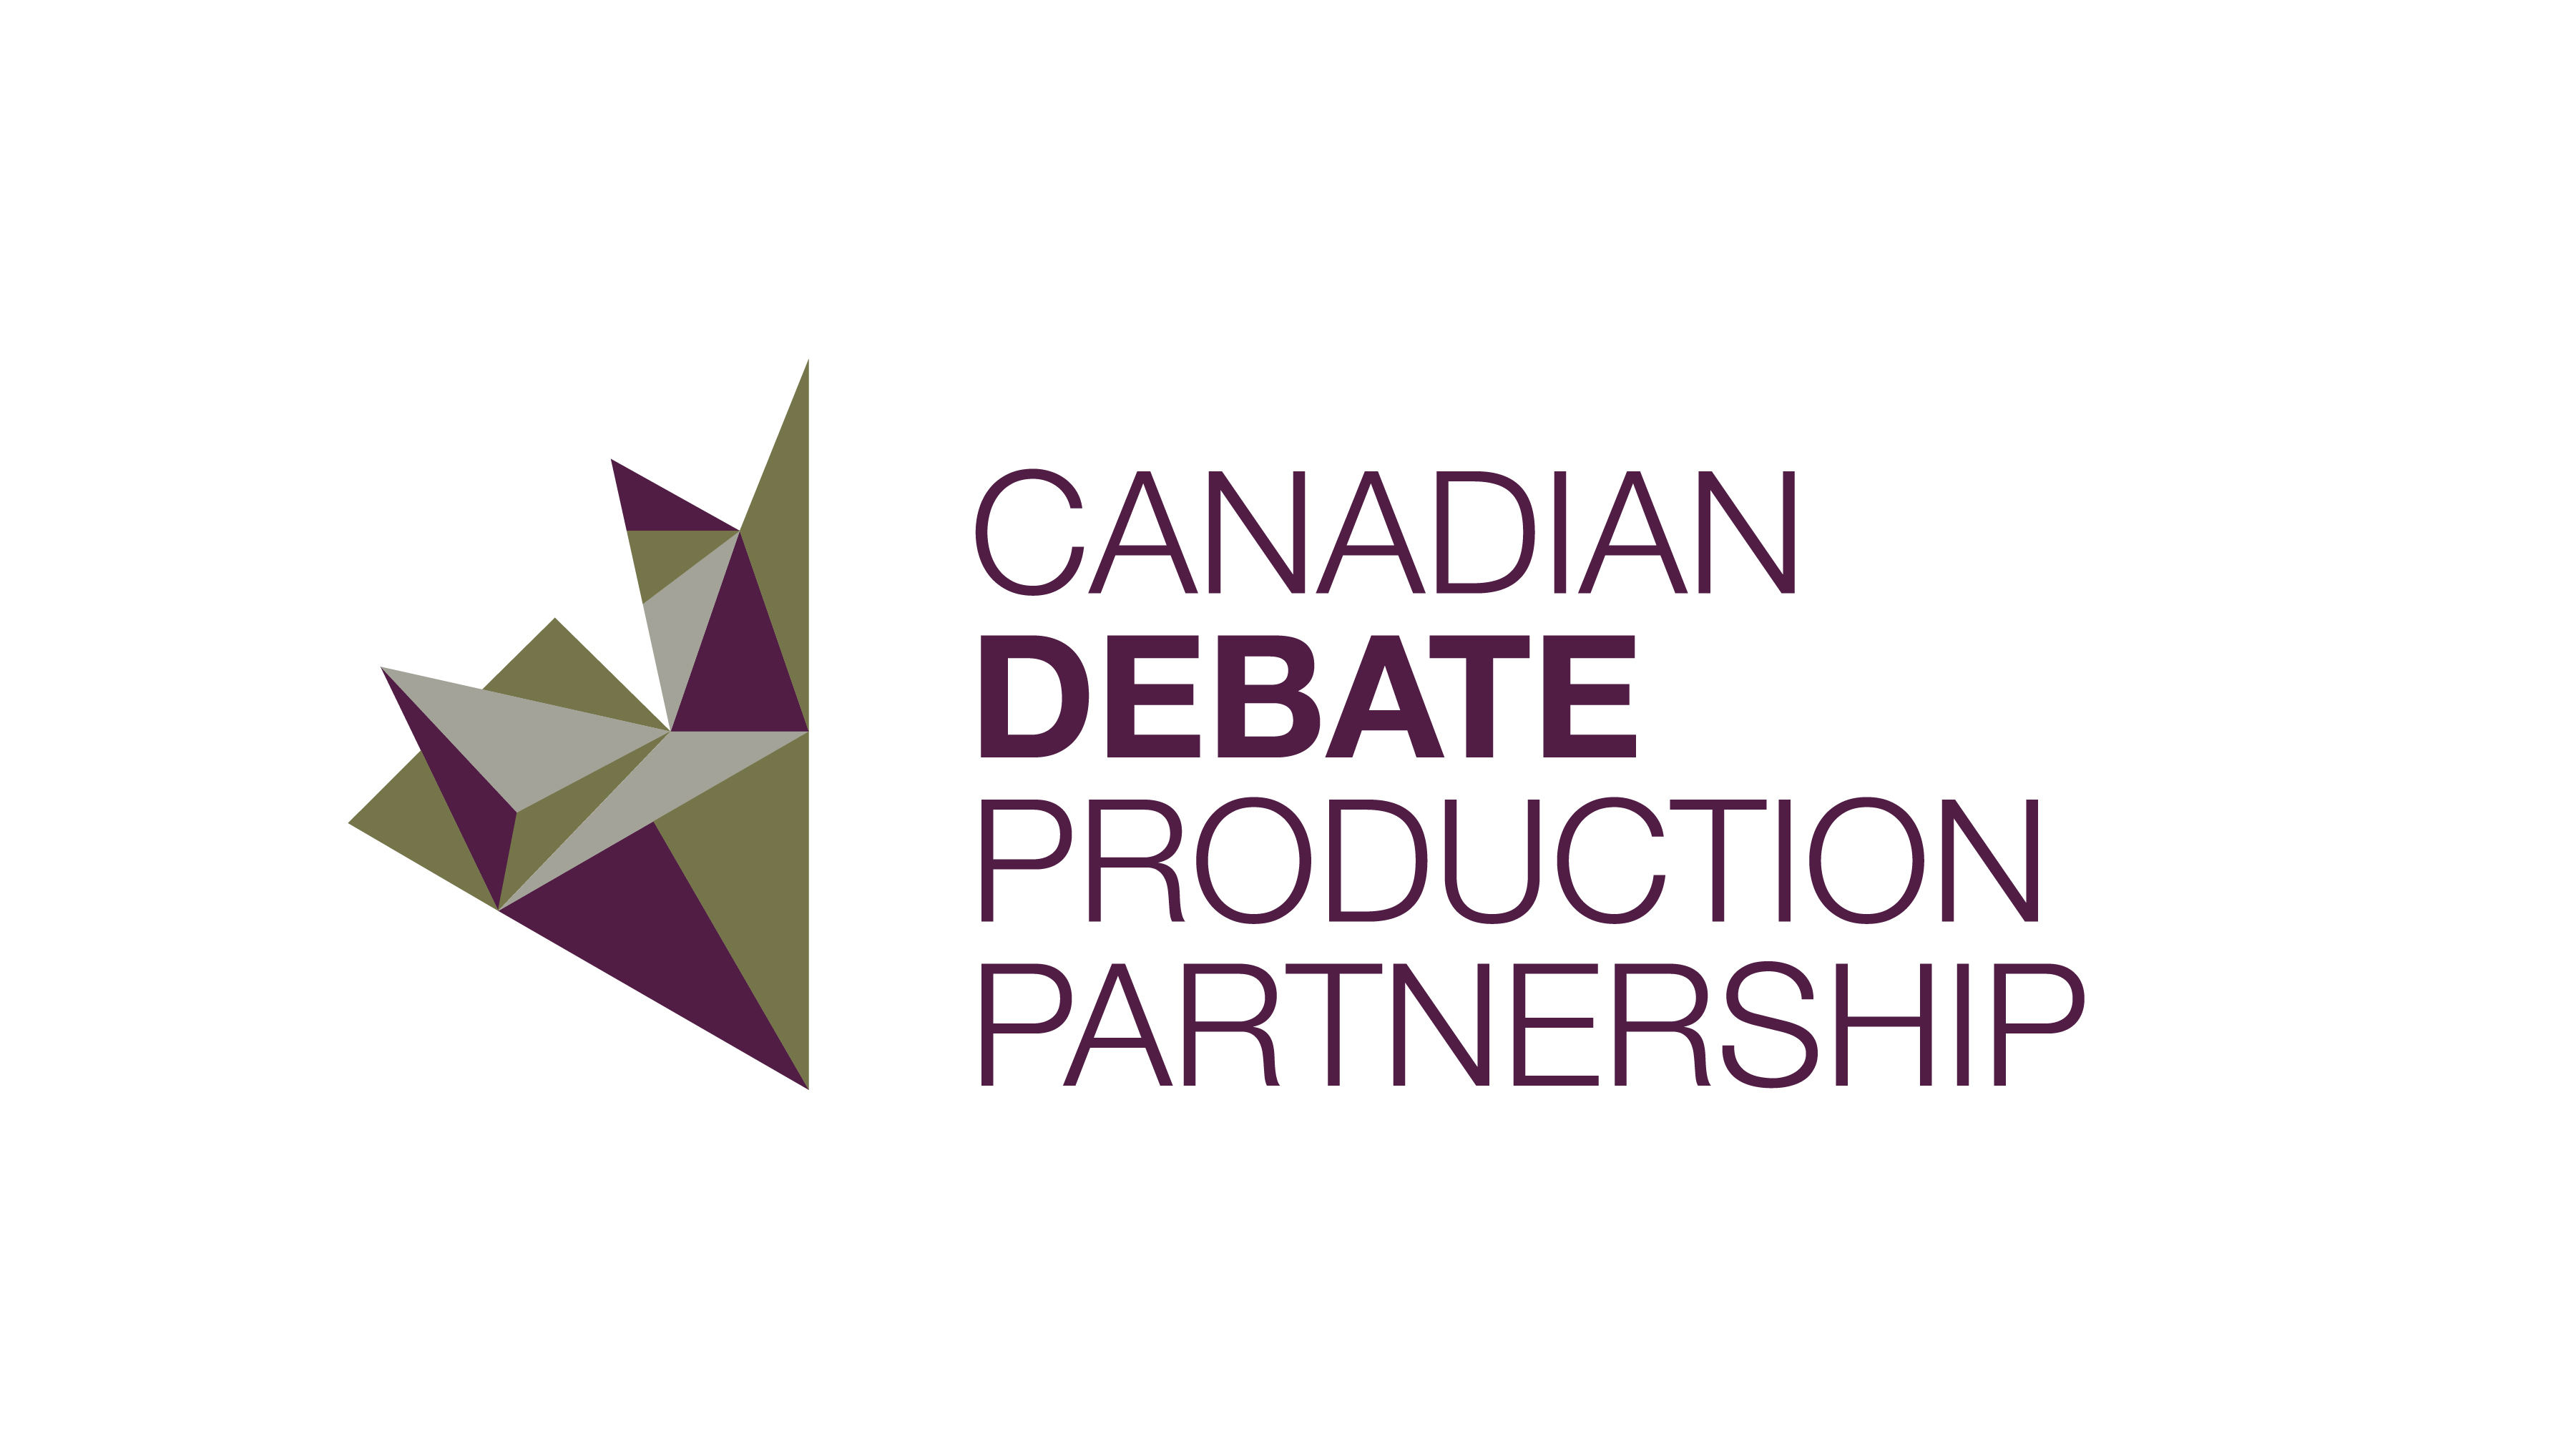 Canadian Debate Production Partnership, Thursday, October 10, 2019, Press release picture